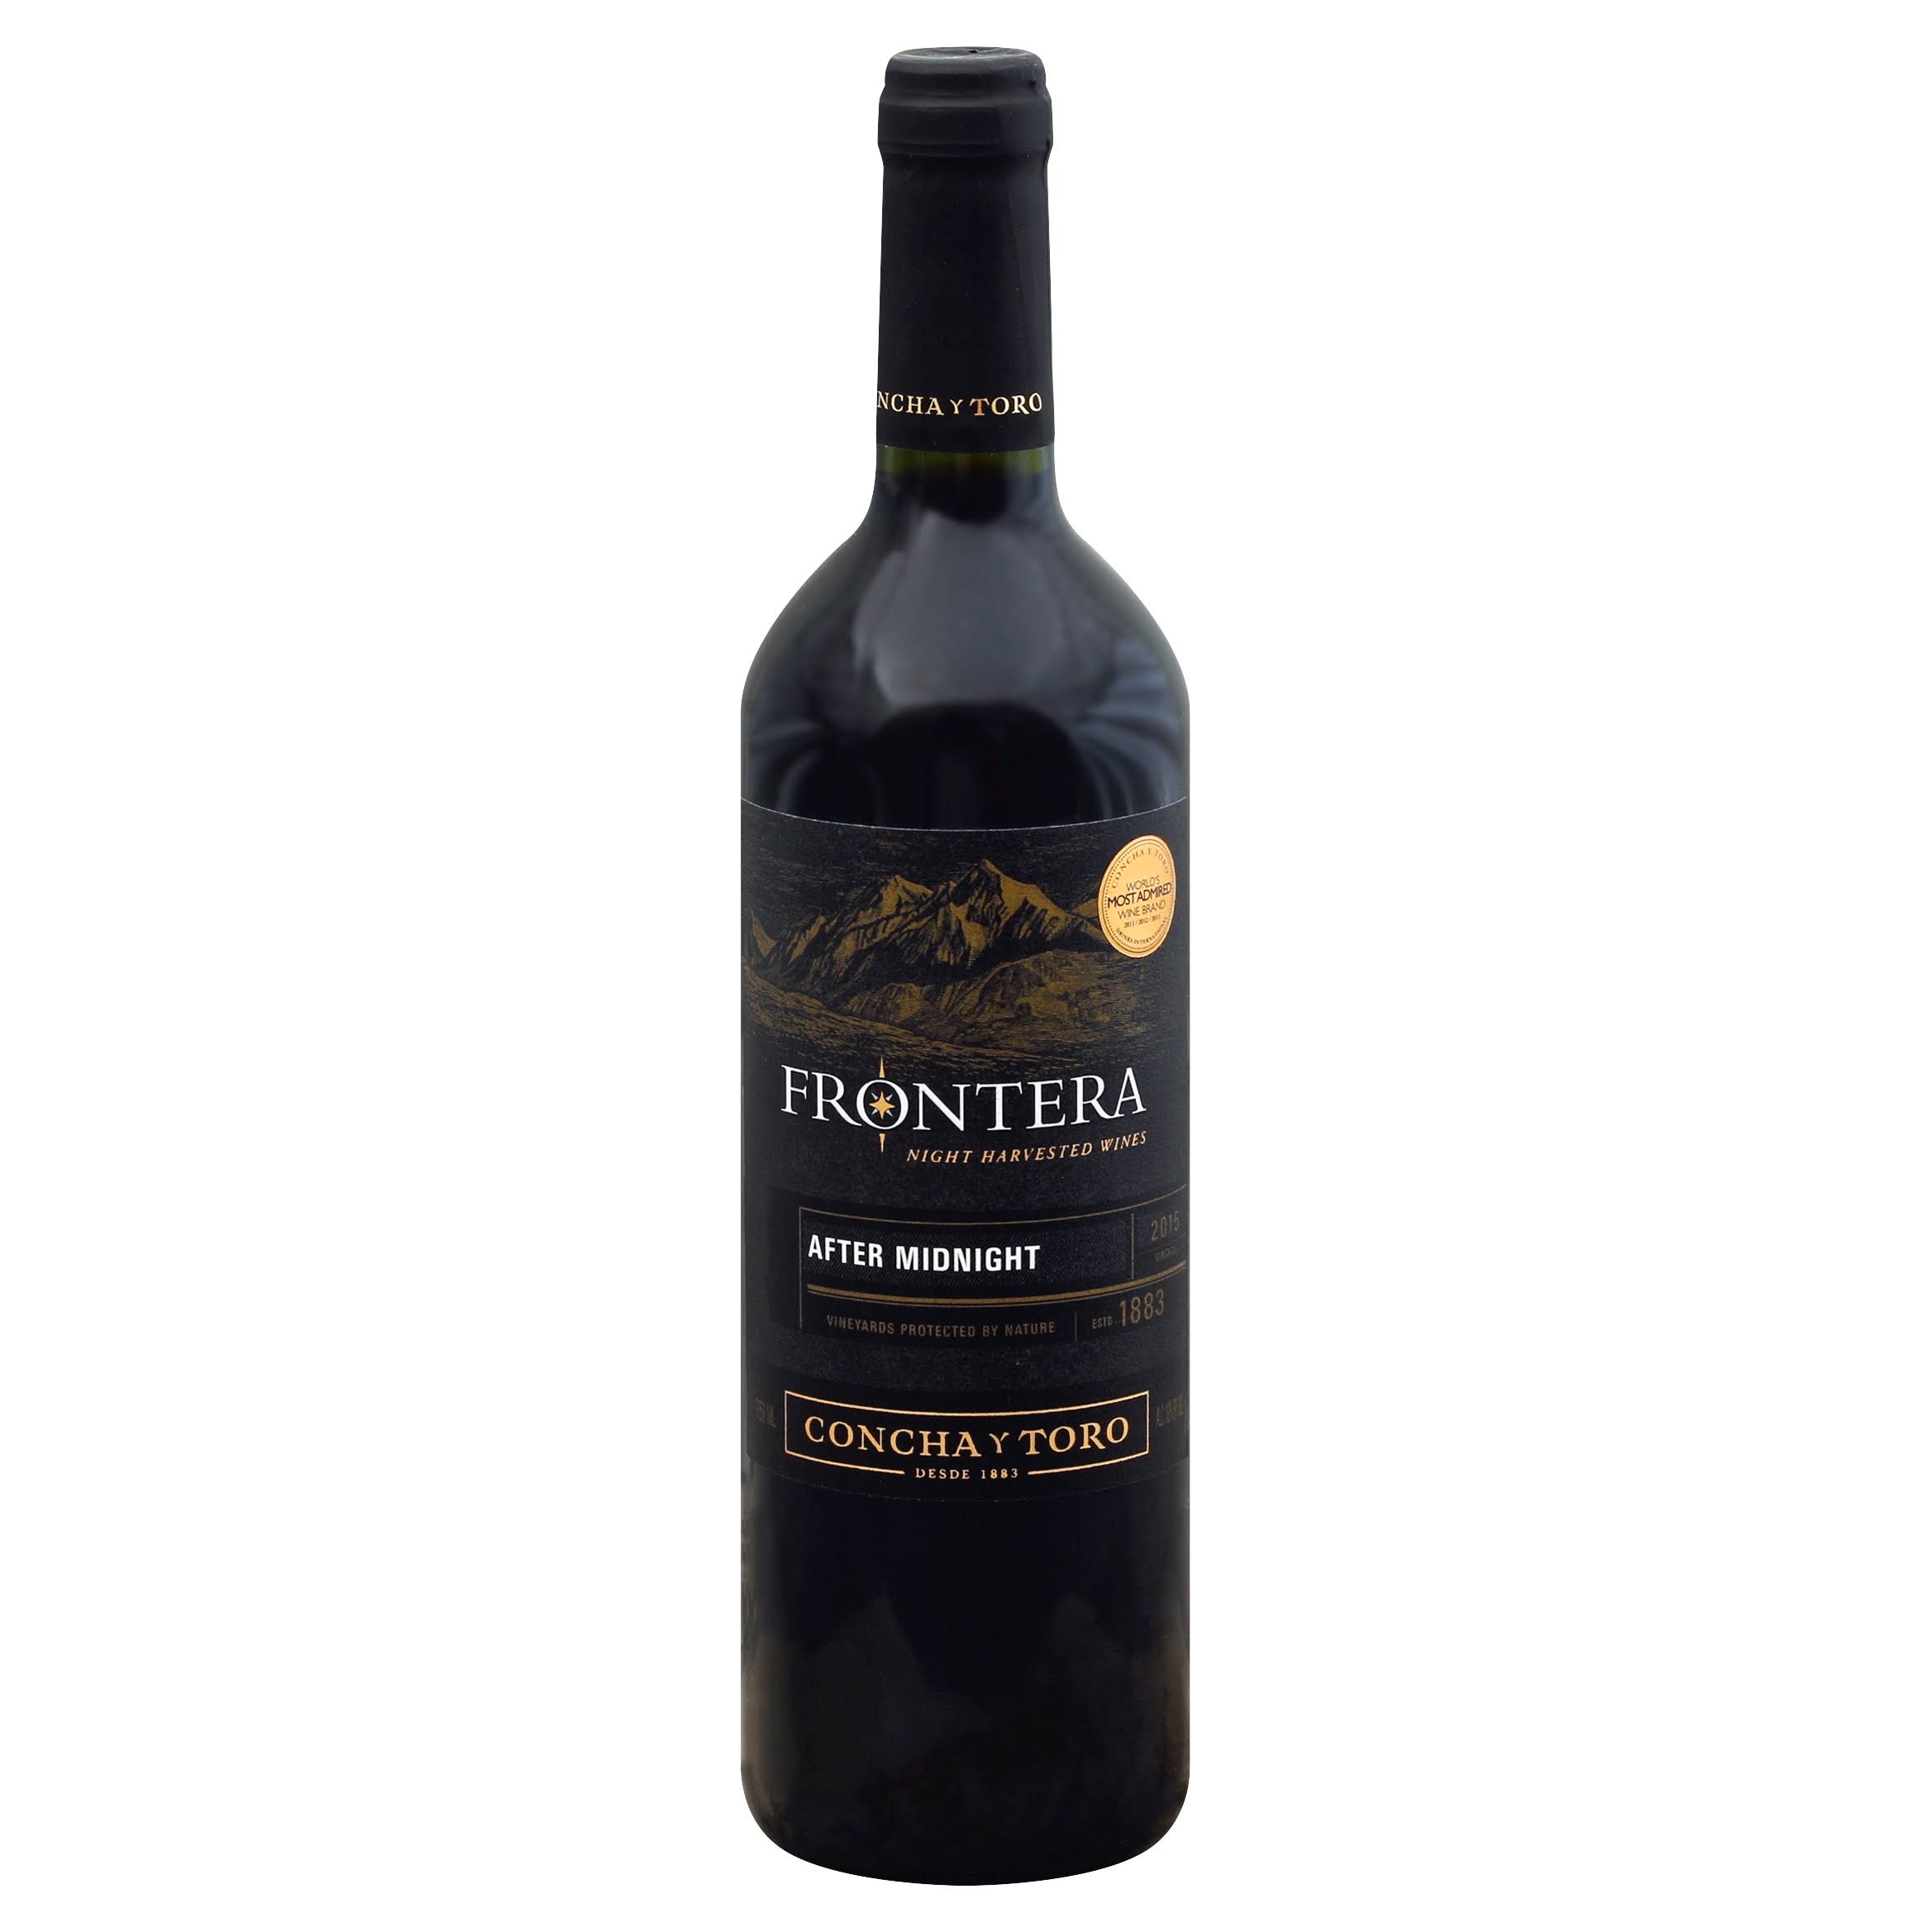 Frontera Red Wine, After Midnight, Central Valley, Chile, 2015 - 750 ml